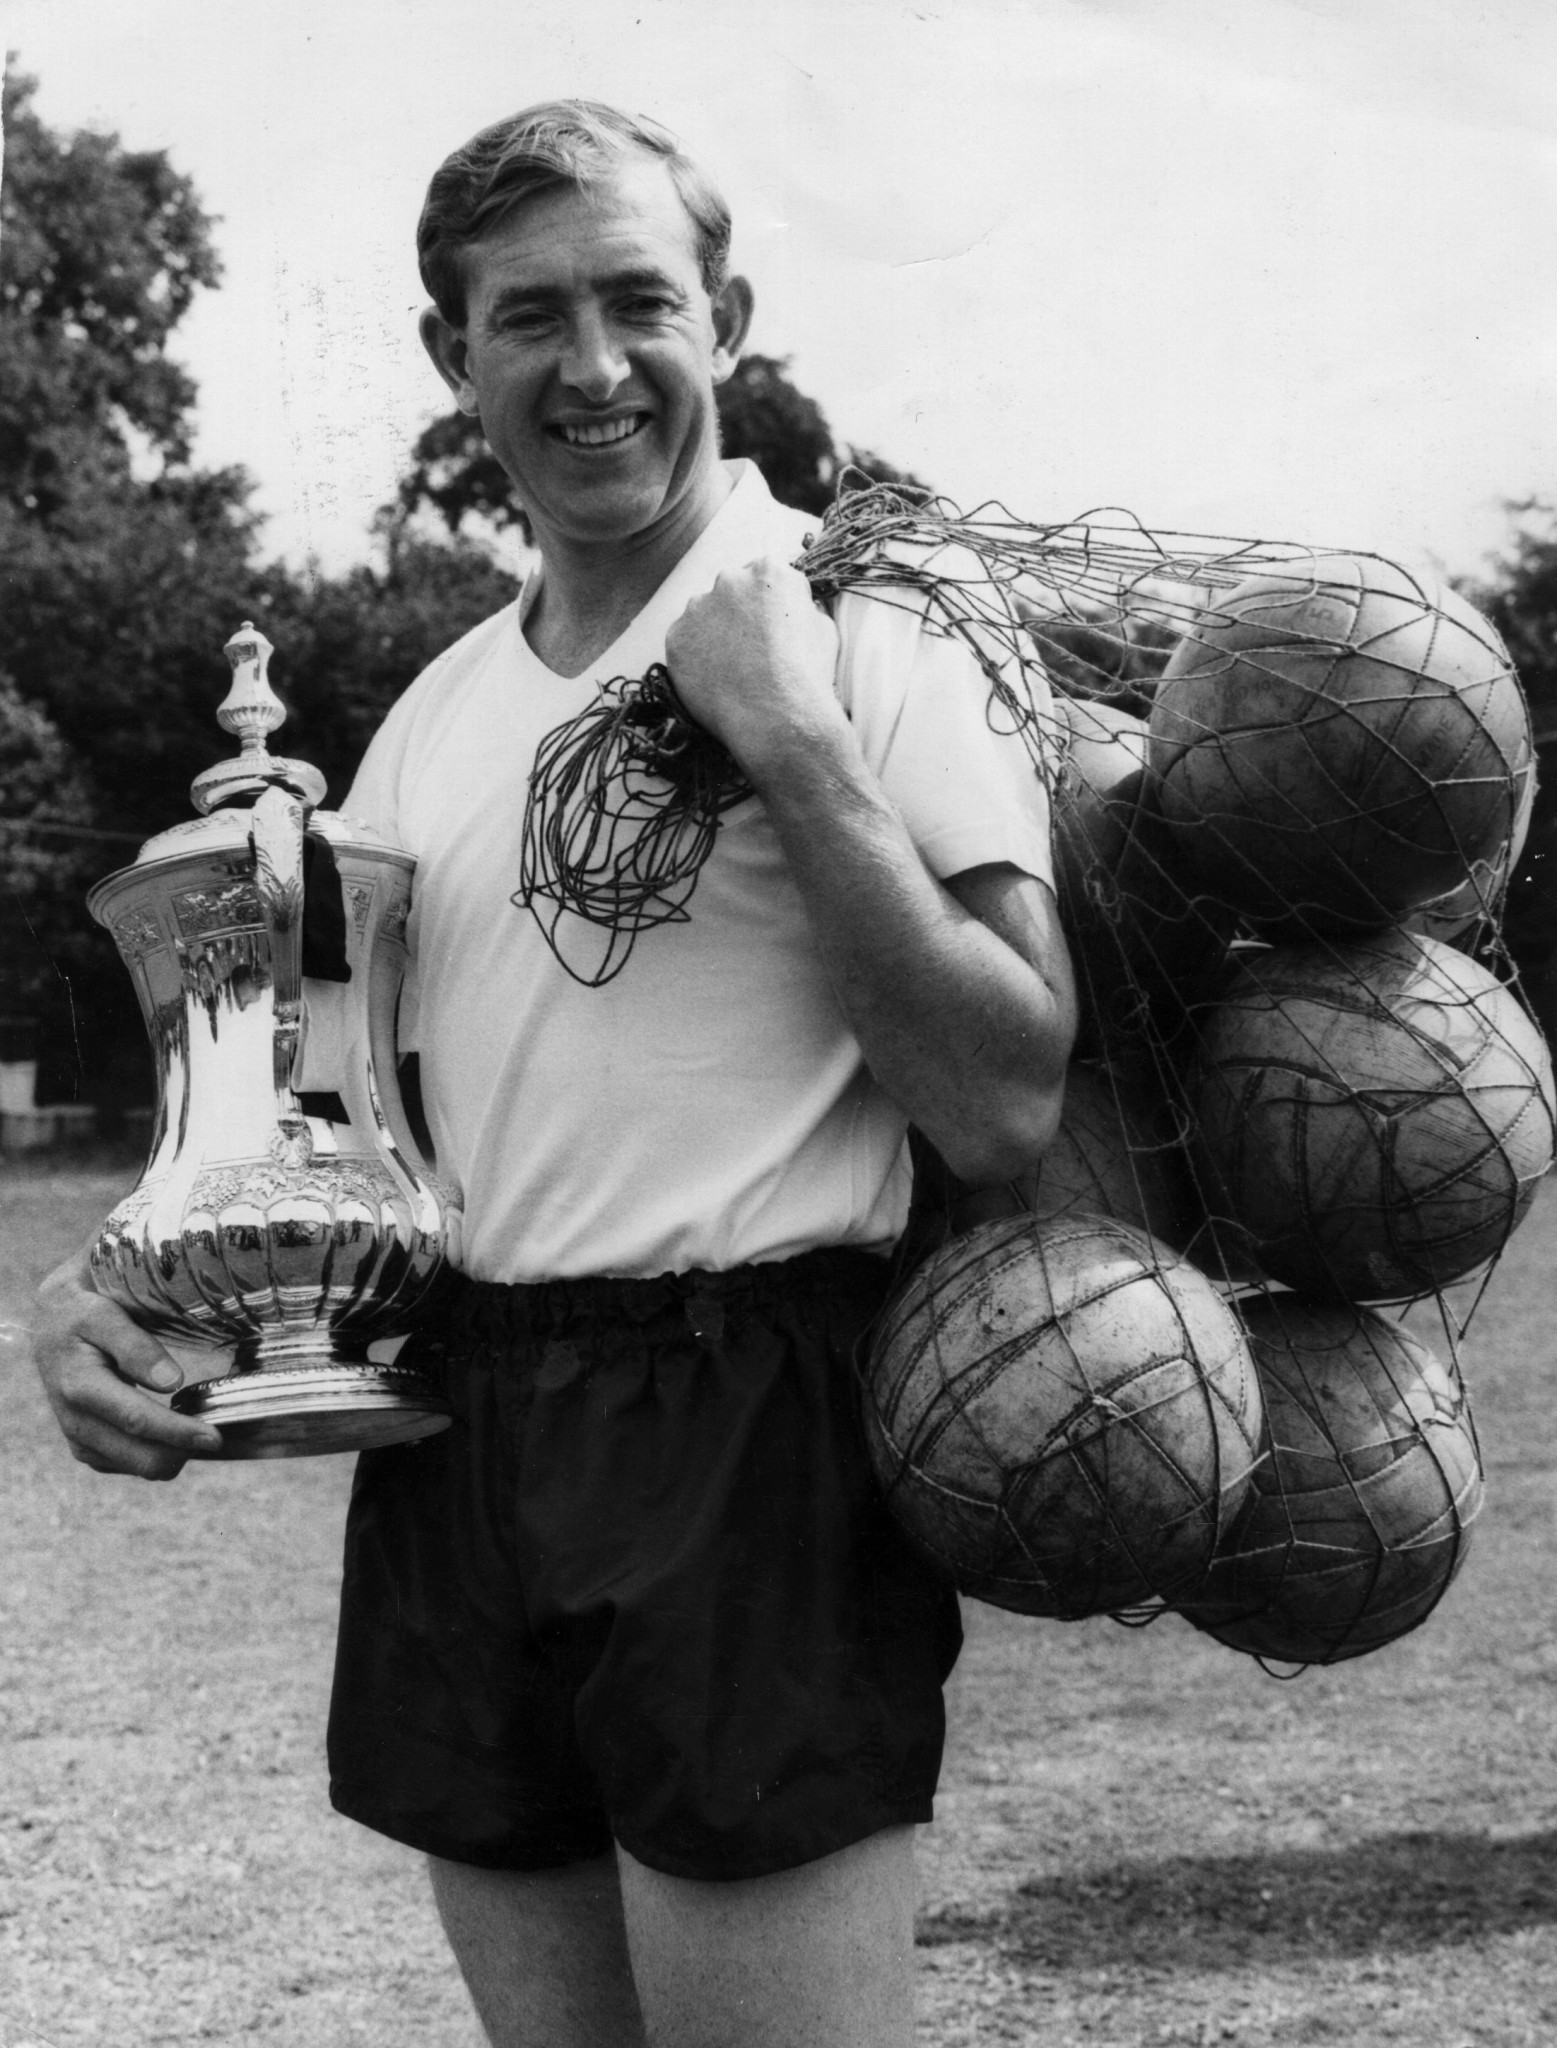 Danny Blanchflower selected The Alexandria Quartet as his book ©Getty Images